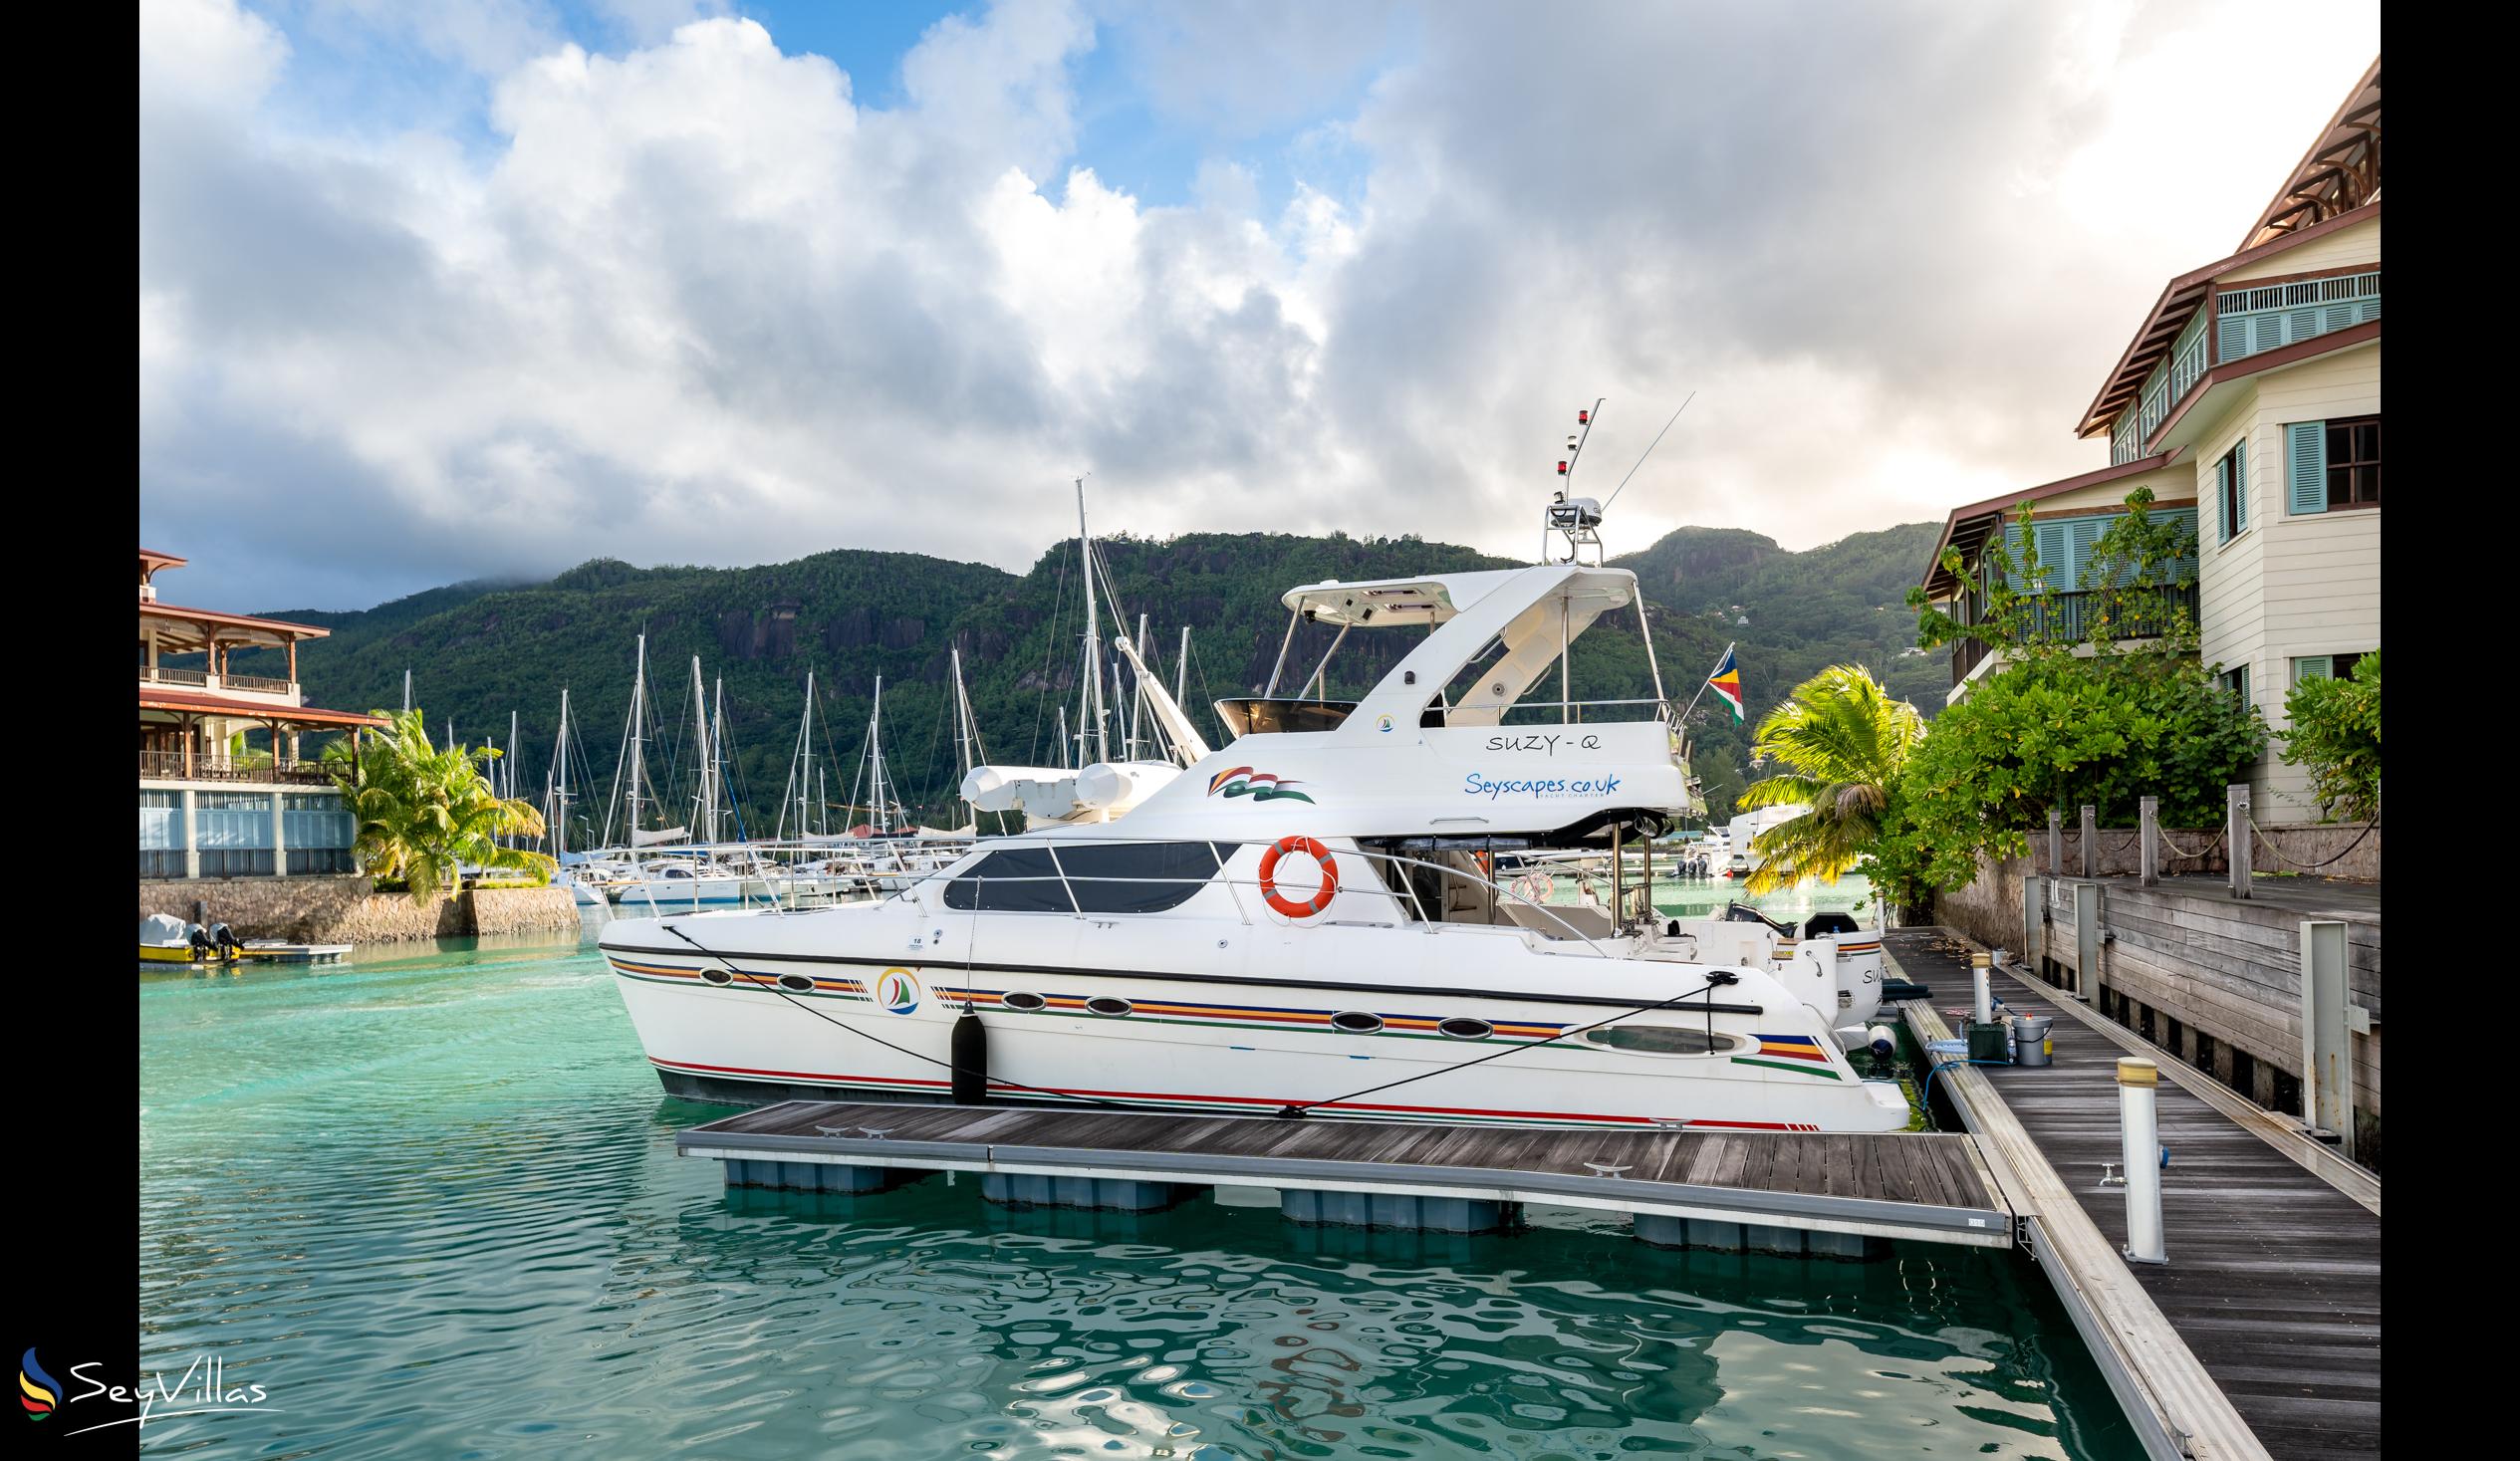 Foto 57: Seyscapes Yacht Charter - Charter Complet Suzy Q - Seychelles (Seychelles)